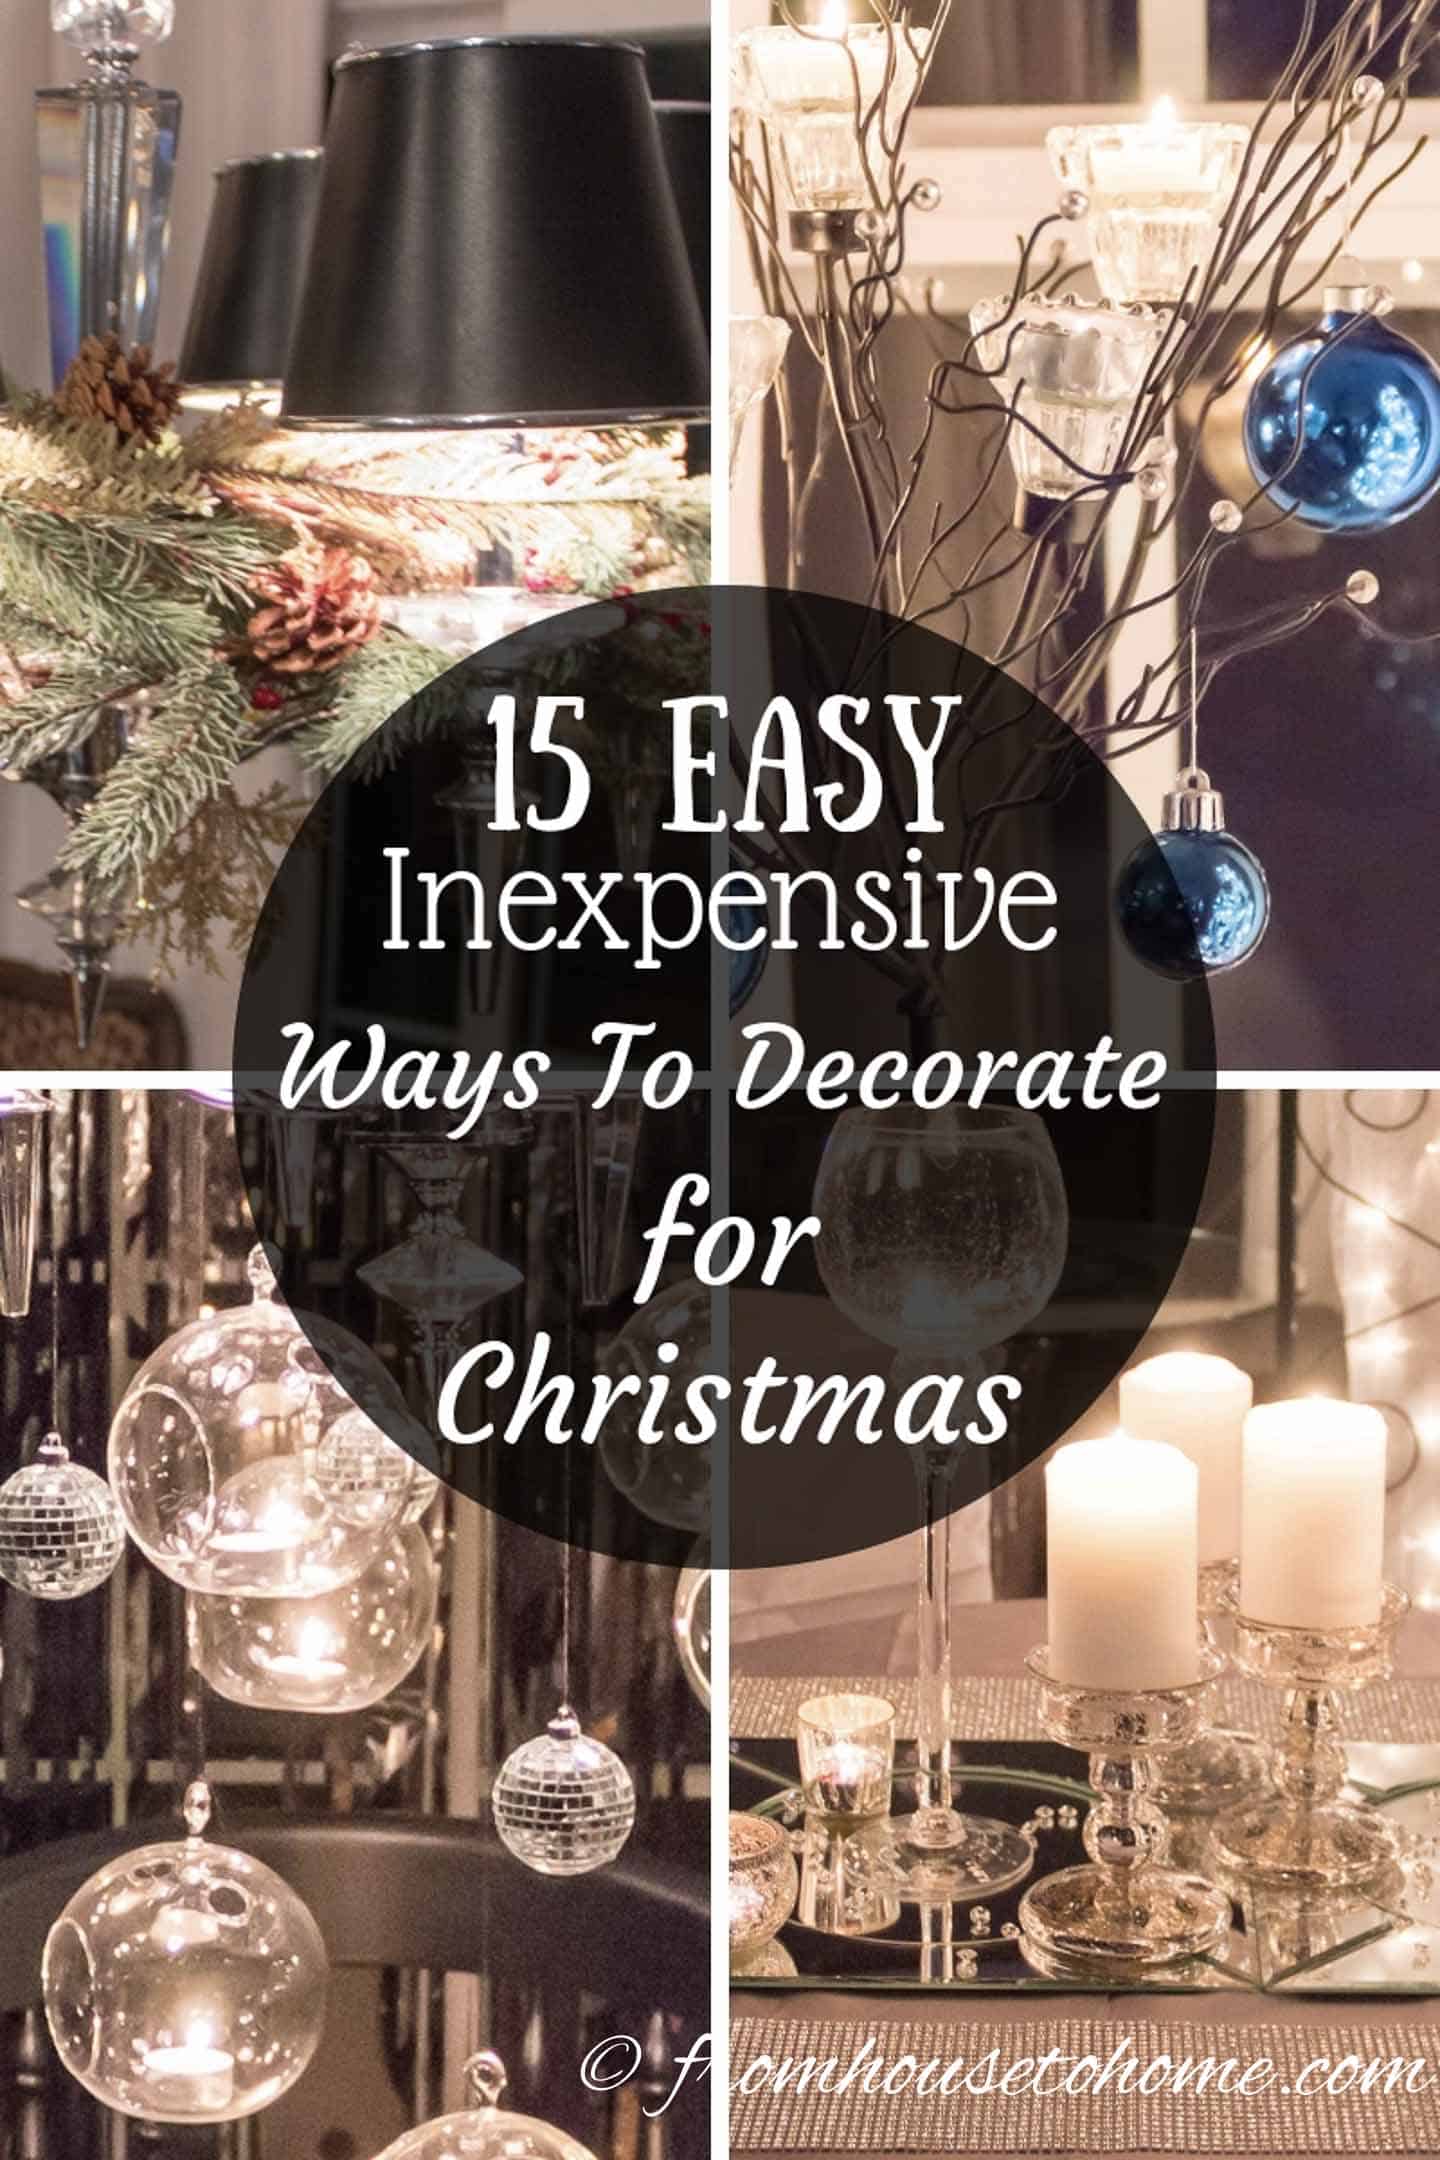 15 easy and inexpensive Christmas decorating ideas